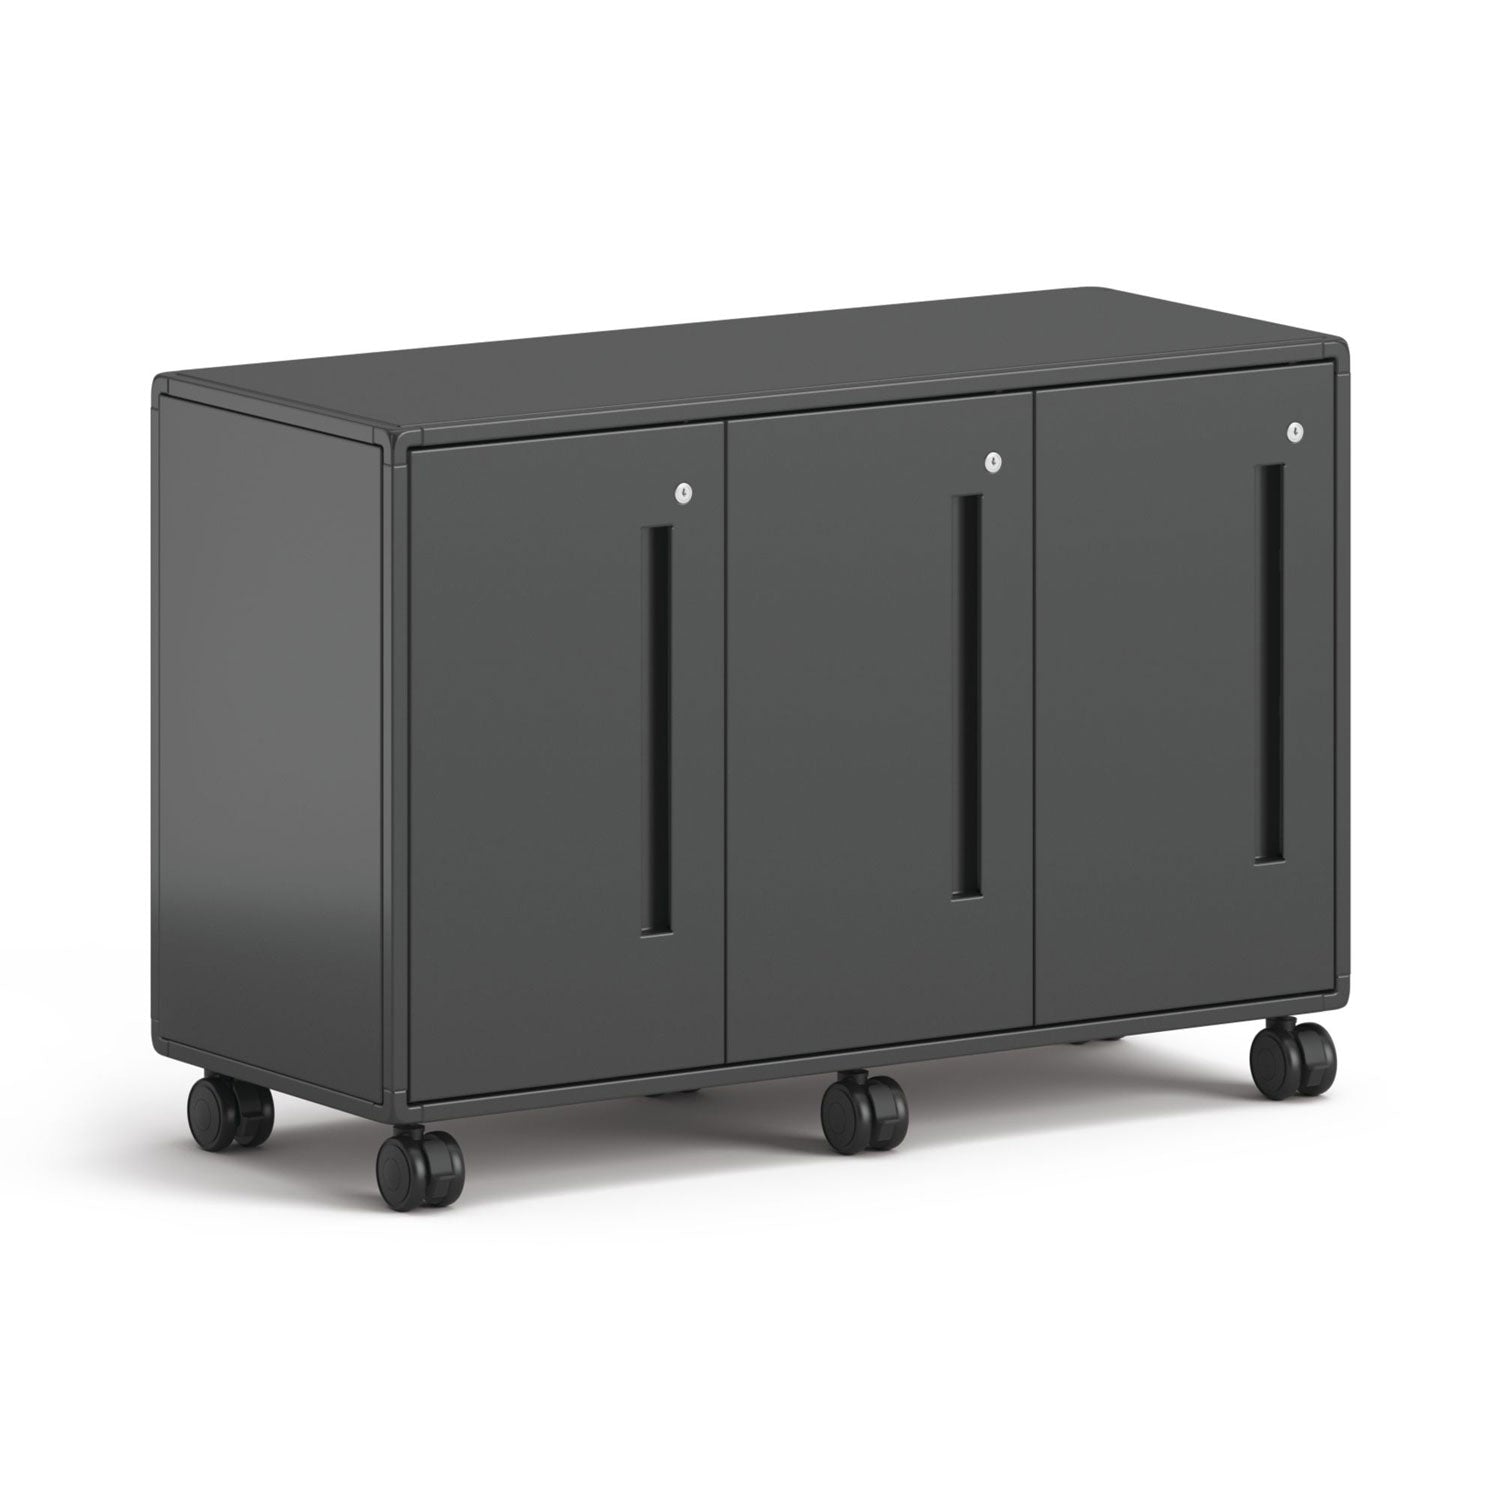 class-ifi-tote-storage-cabinet-three-wide-4663-x-1875-x-3138-charcoal-gray_honest2h3wnssna - 3